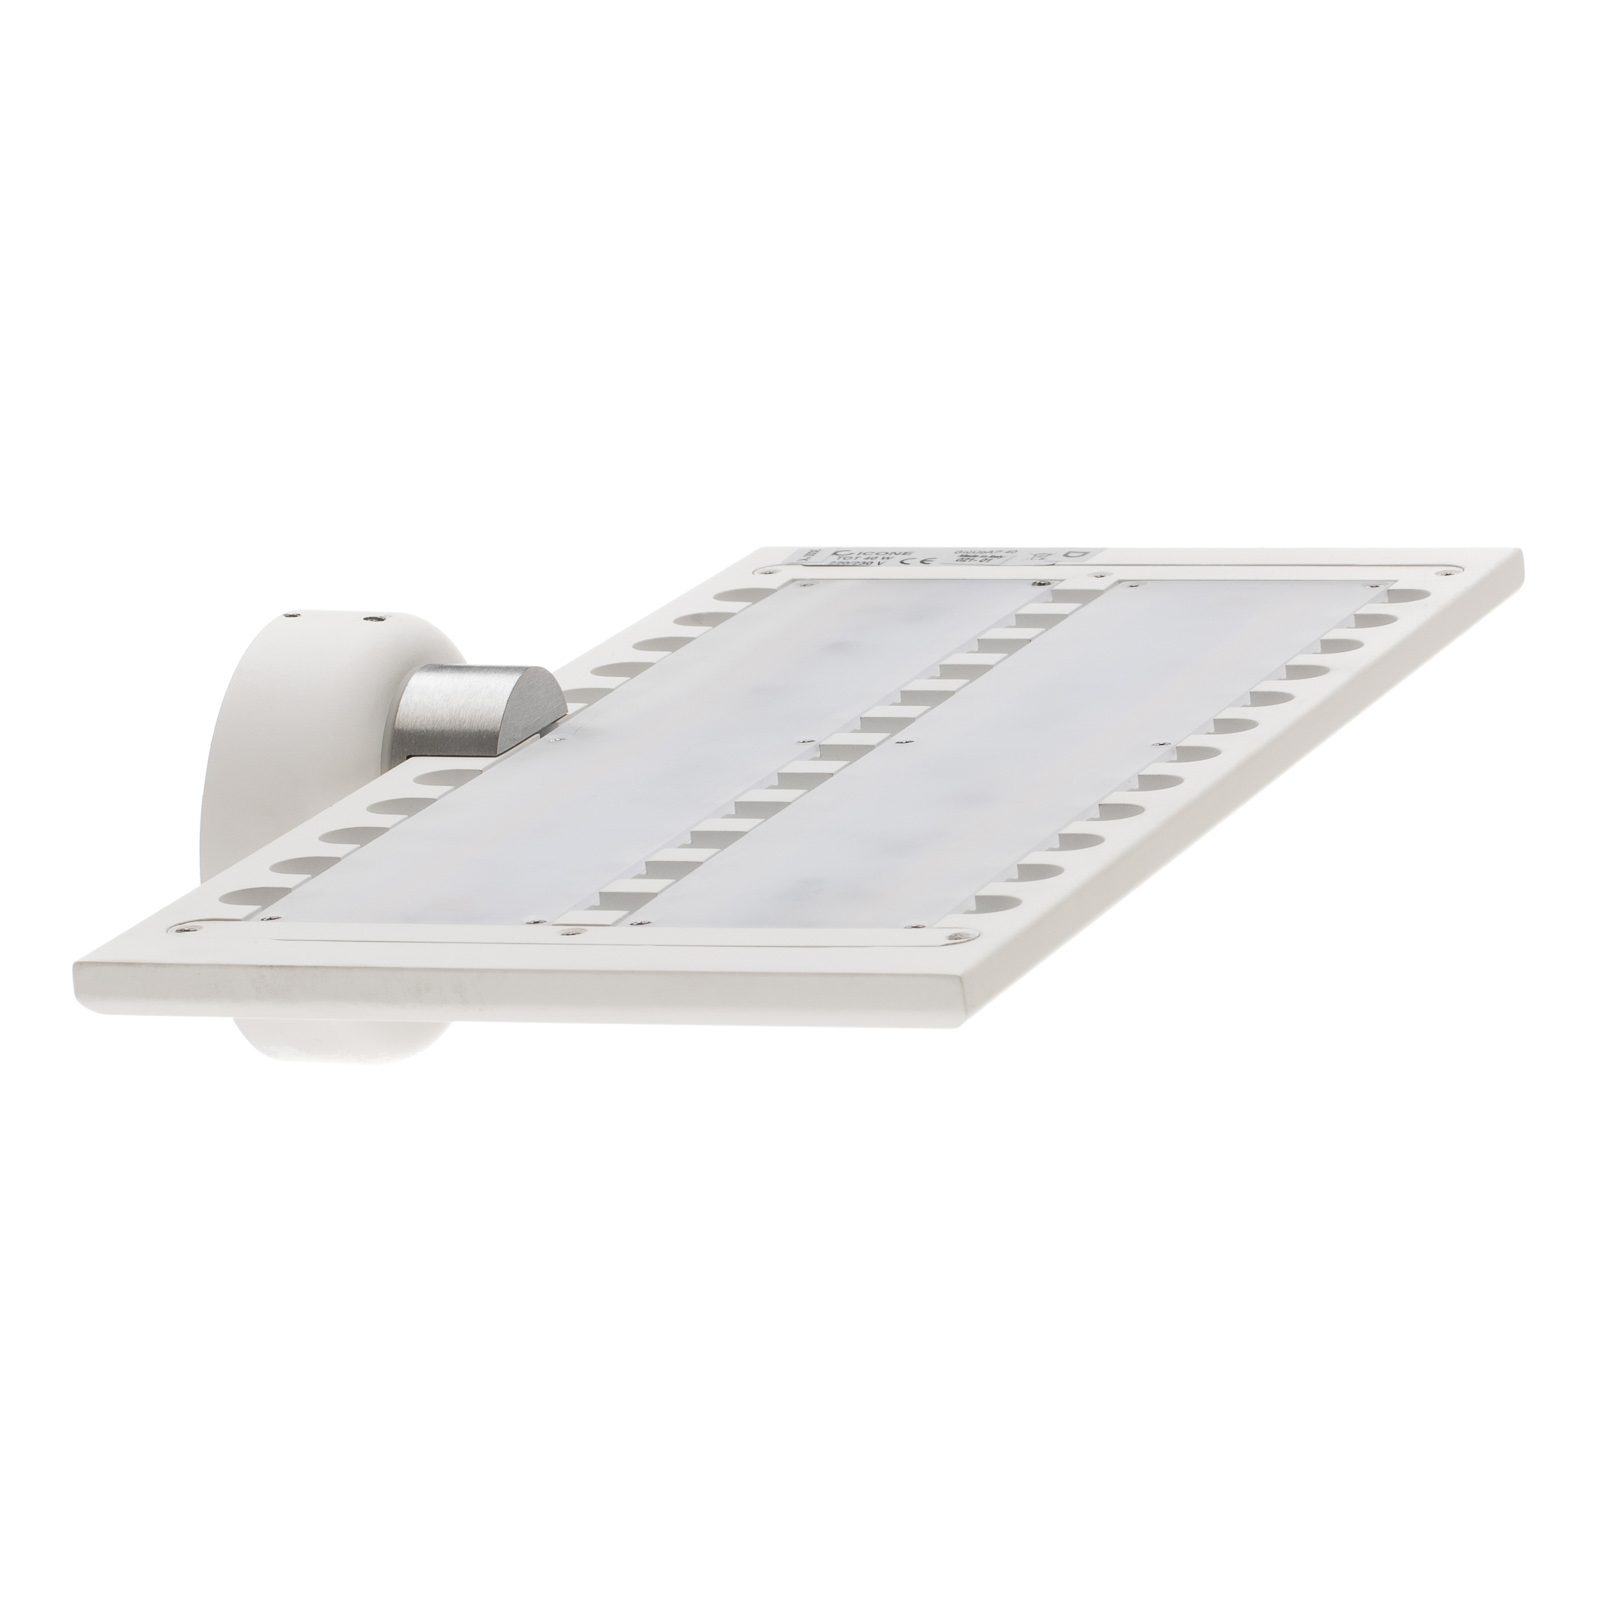 ICONE GiuUp LED wall uplighter 40W, white